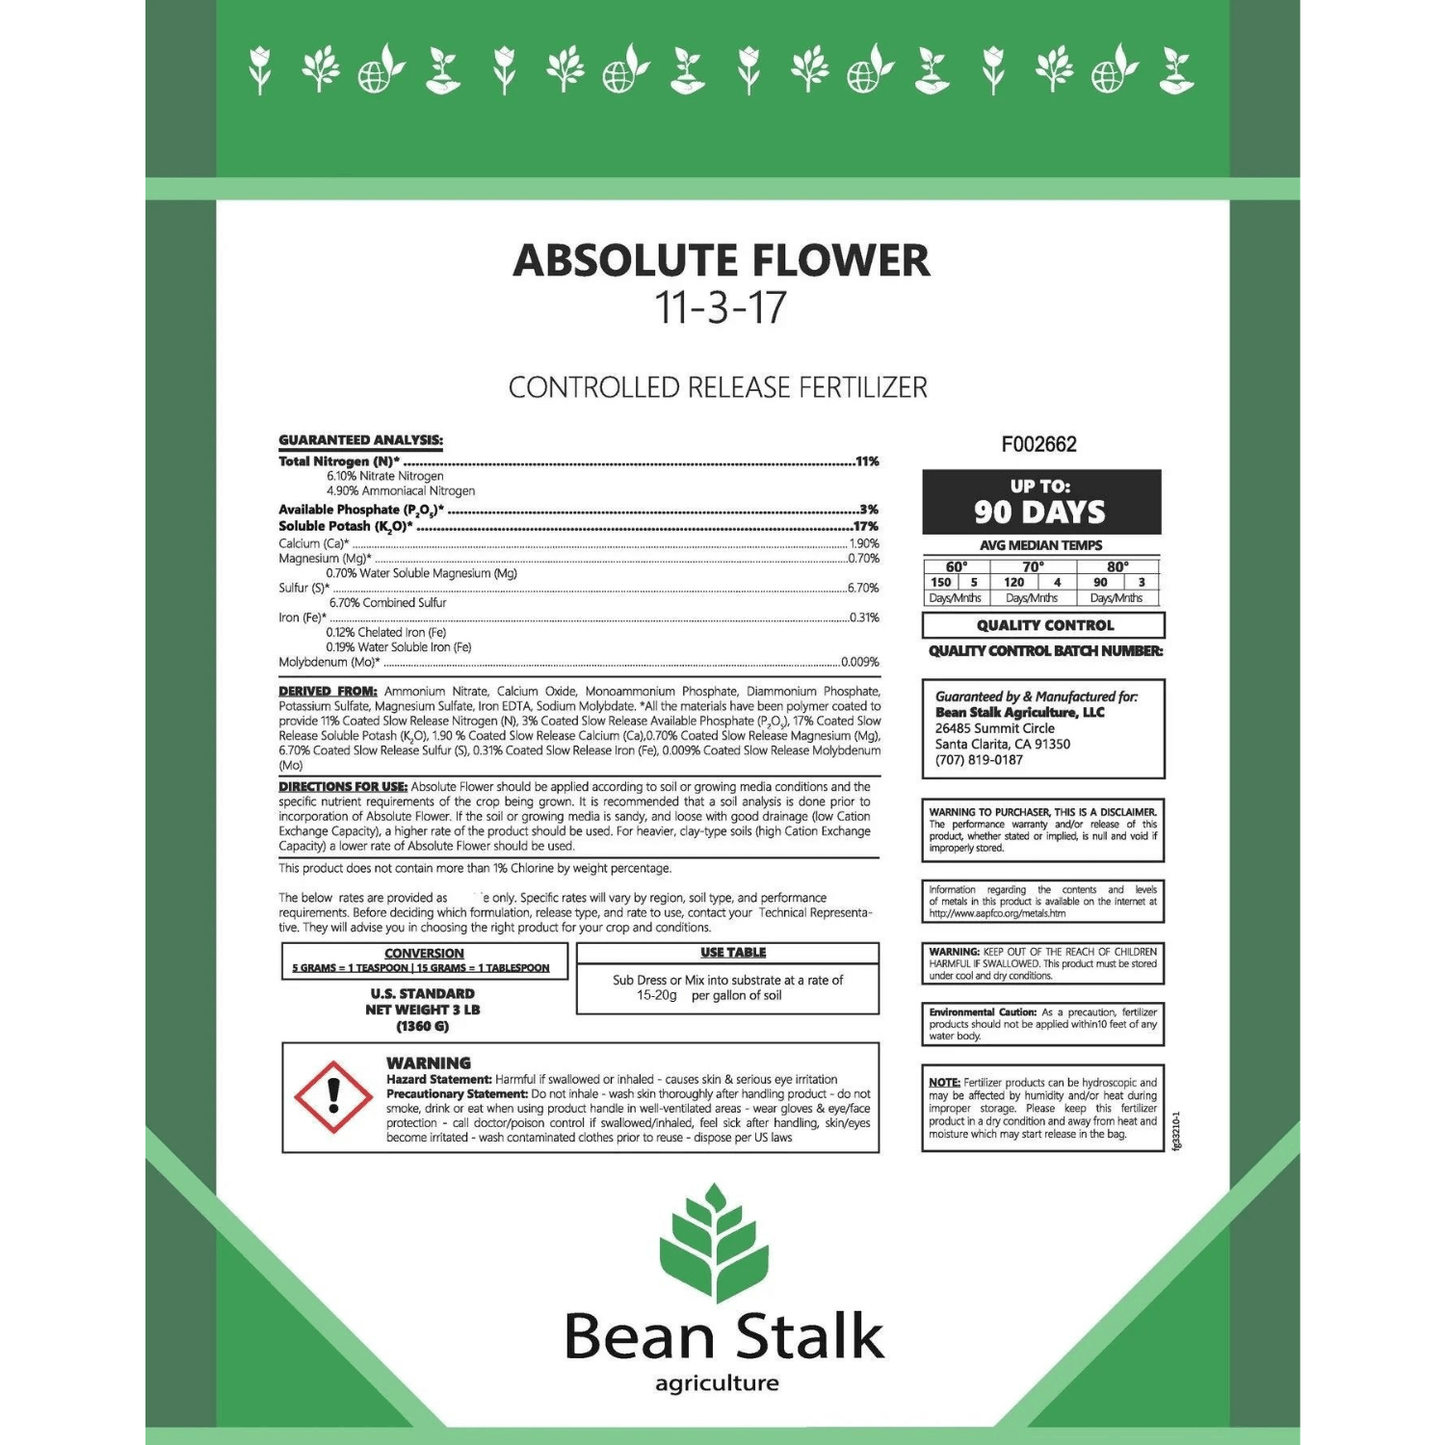 Beanstalk Absolute Flower Controlled Release Fertilizer for Flower, 1 lb Pouch BSA-AF1 Planting & Watering